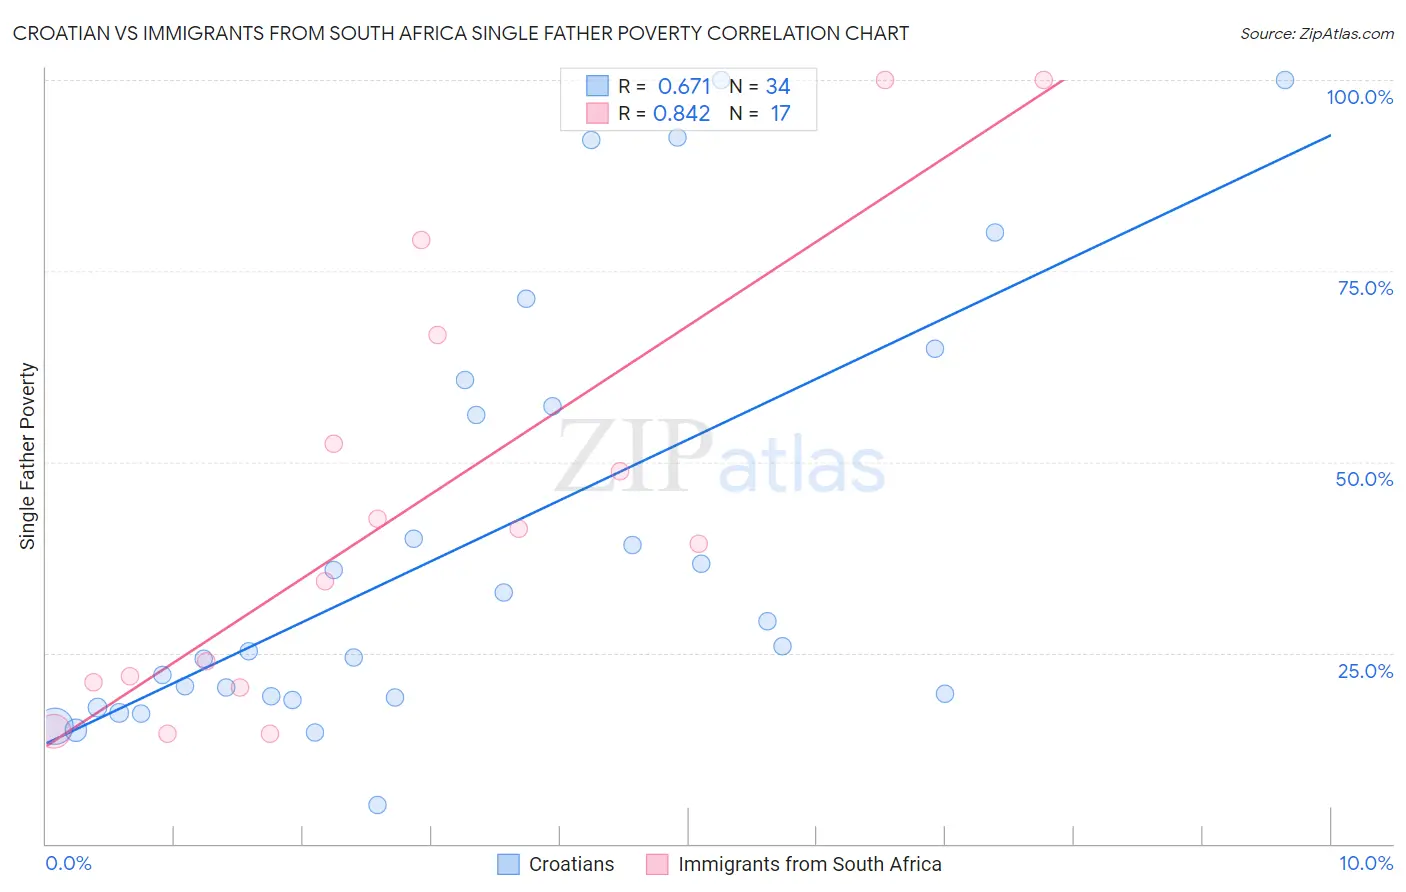 Croatian vs Immigrants from South Africa Single Father Poverty